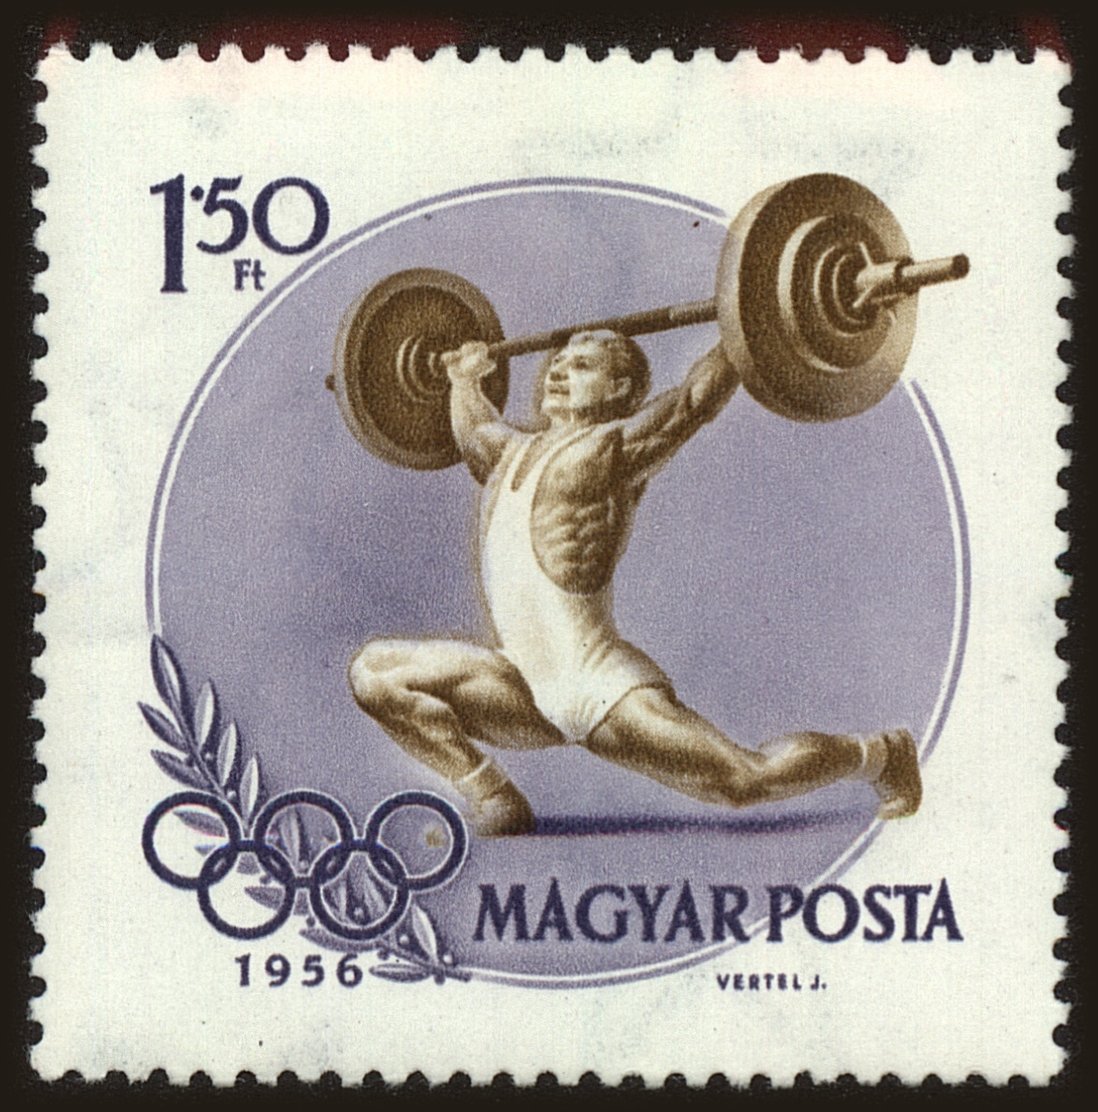 Front view of Hungary 1165 collectors stamp